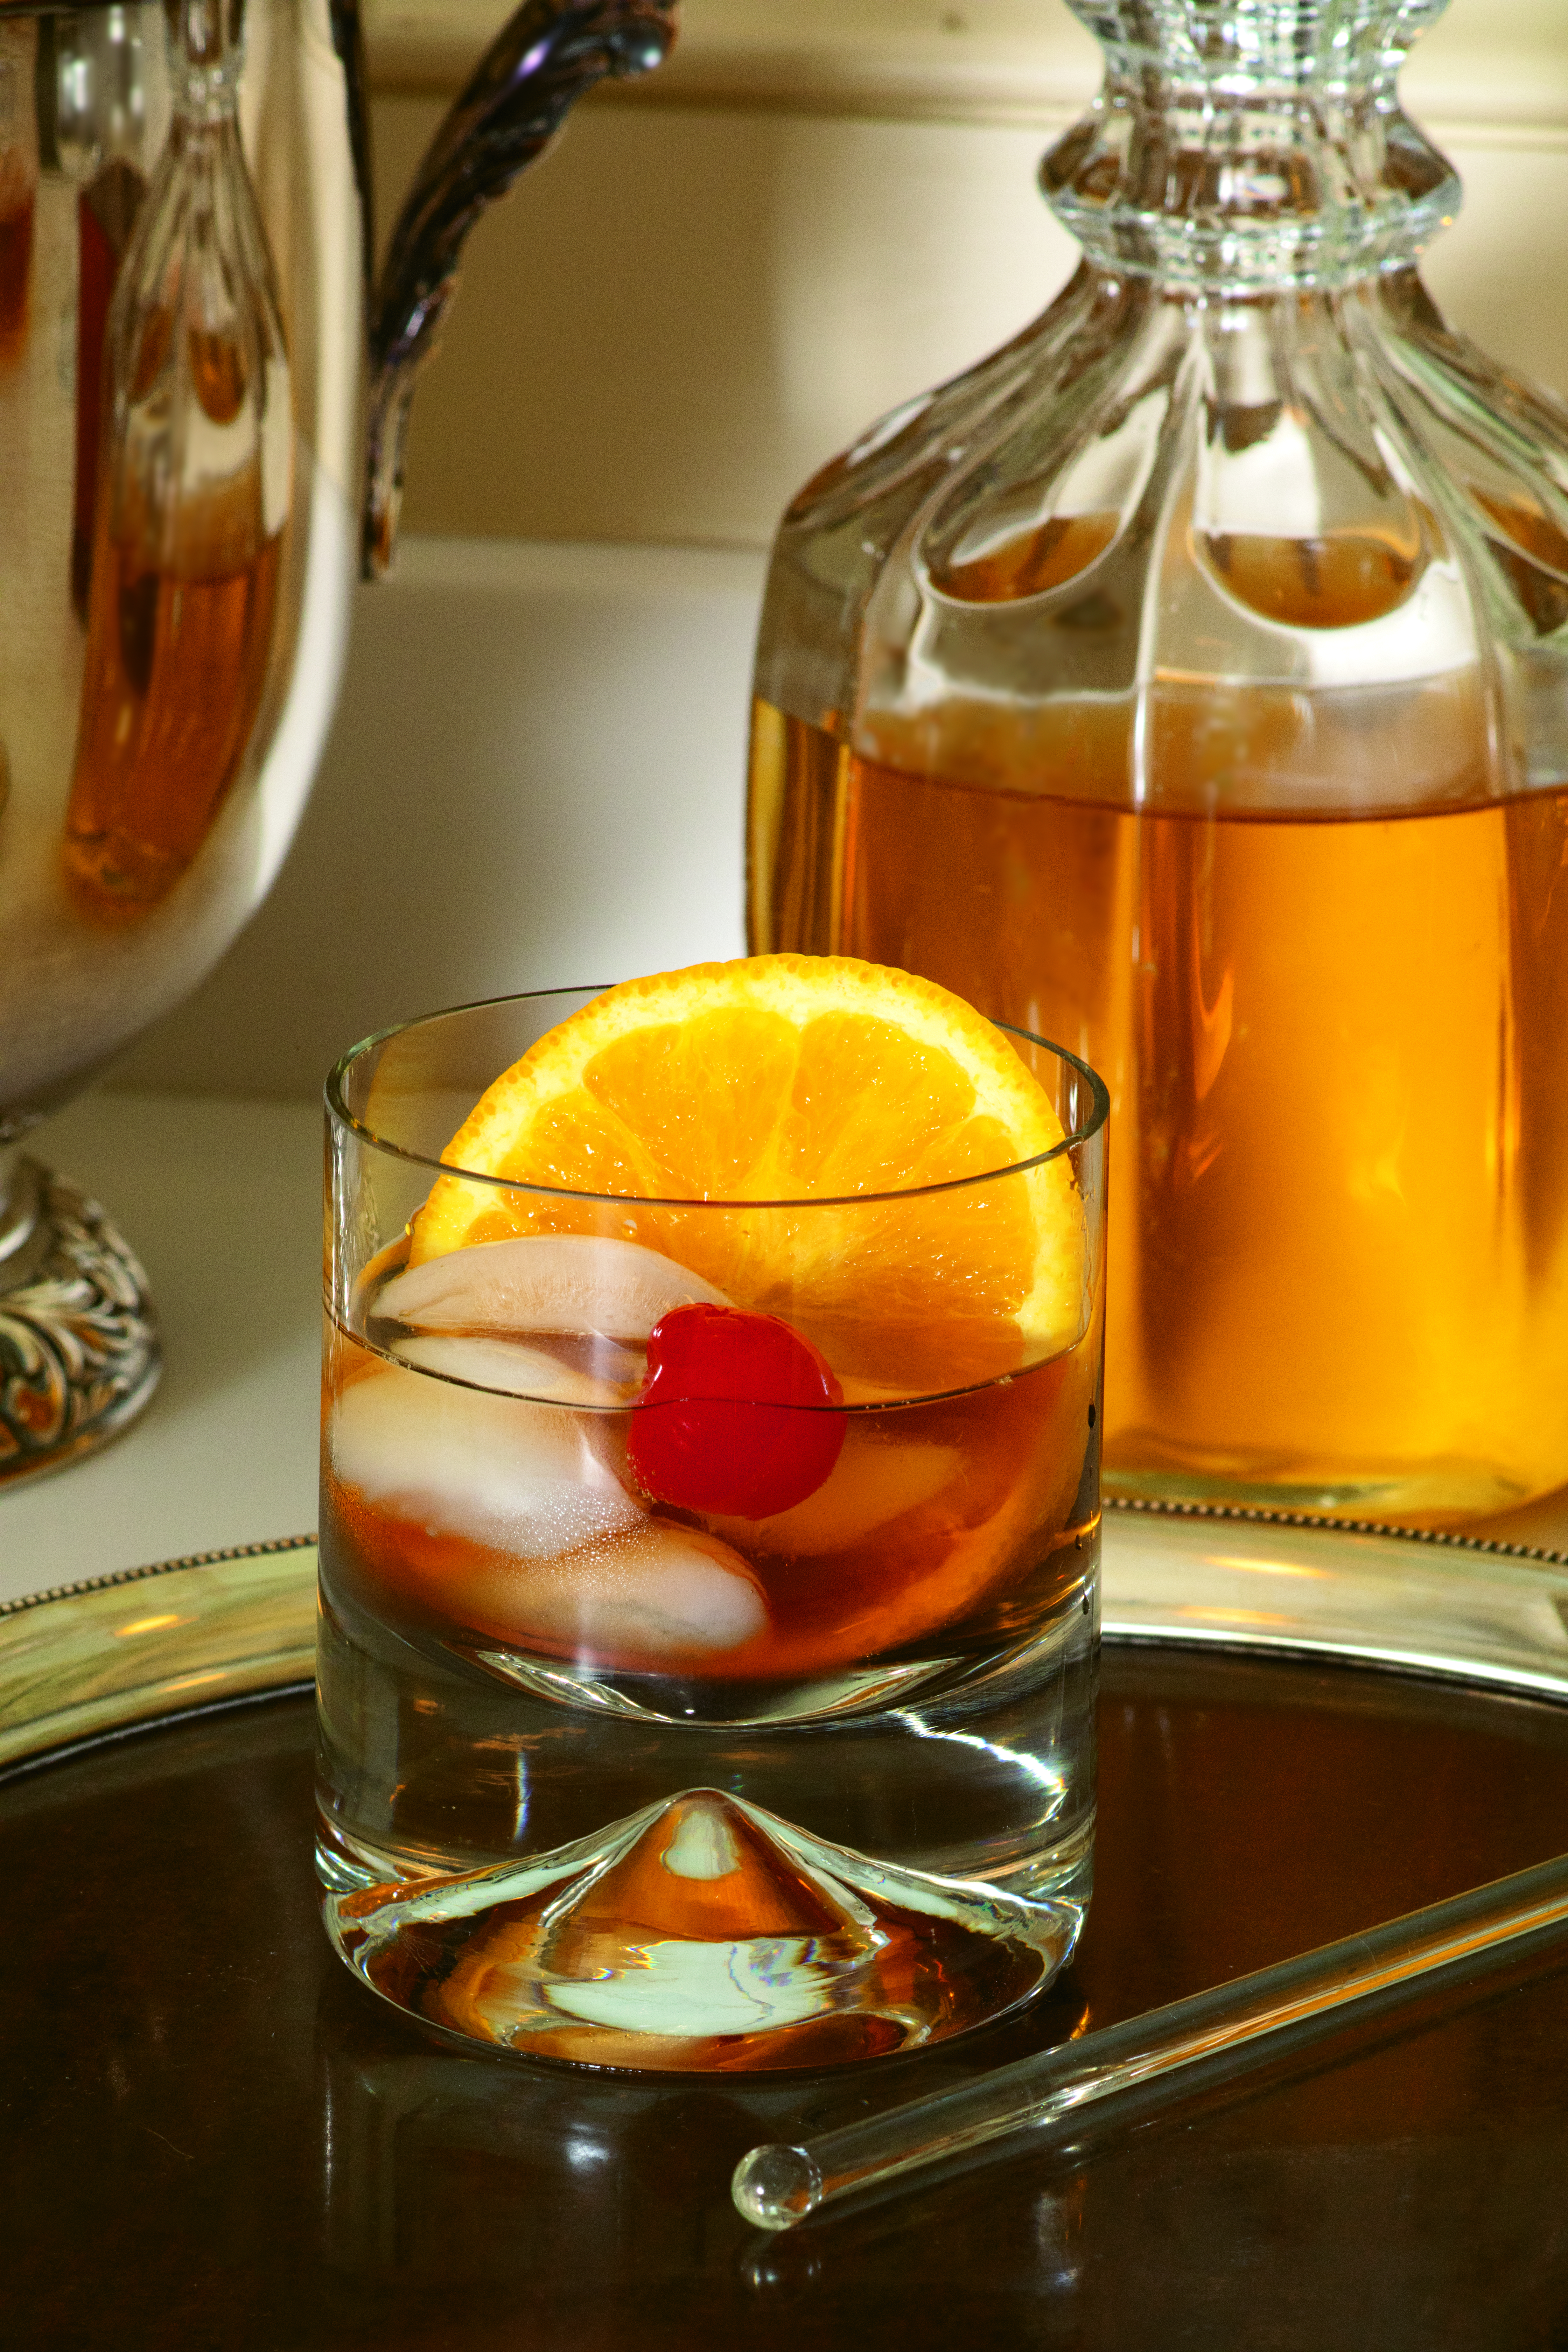 The Old-Fashioned is particularly popular in the South, where a love of tradition and a devotion to whiskey make it a local favorite.